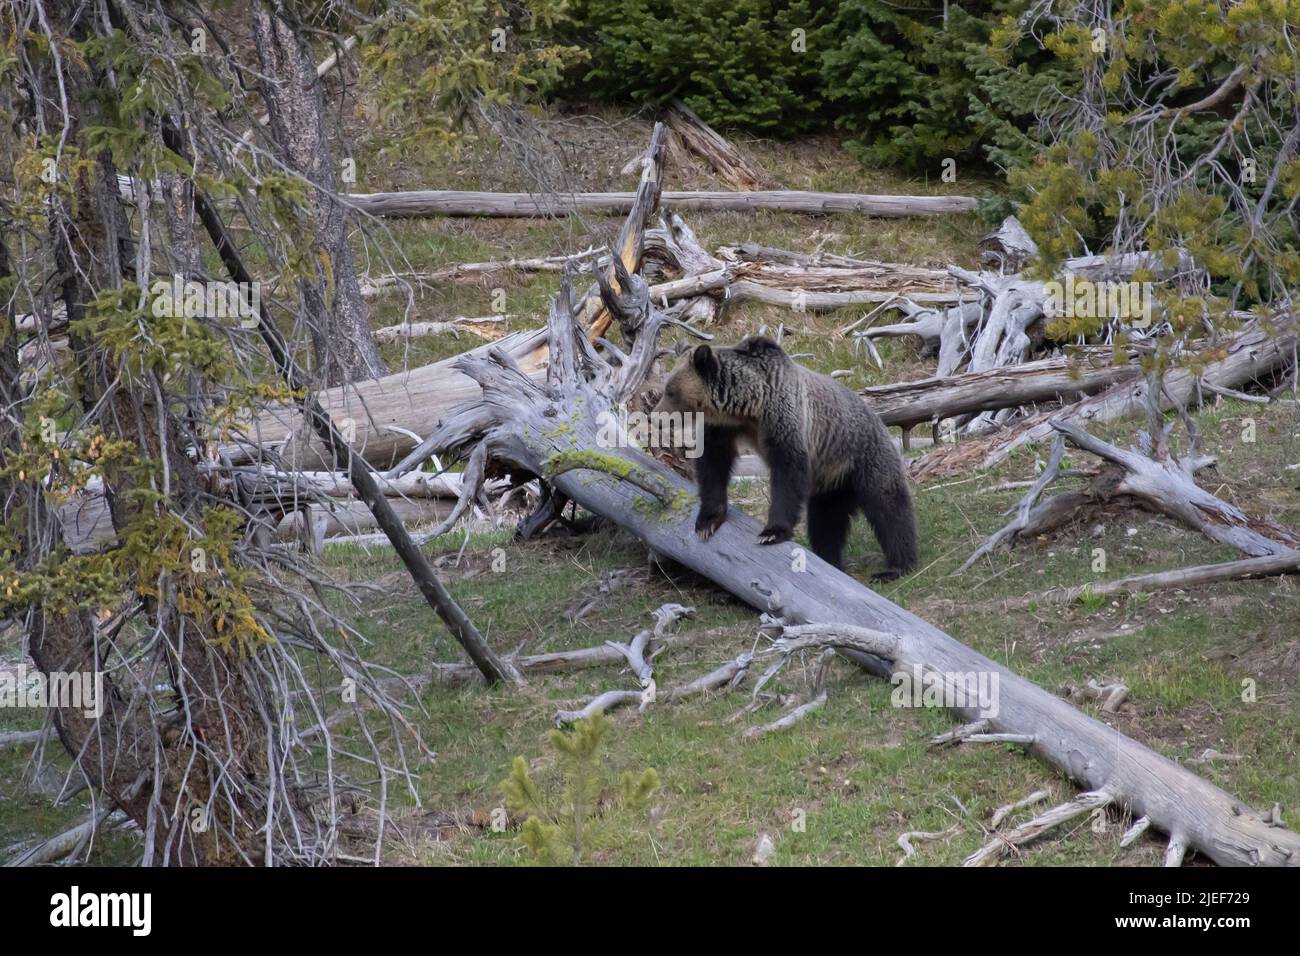 An adult Grizzly Bear, Ursus horribilis, pauses while crossing fallen logs at Yellowstone NP, WY, USA, pre-closure 5/22. Stock Photo